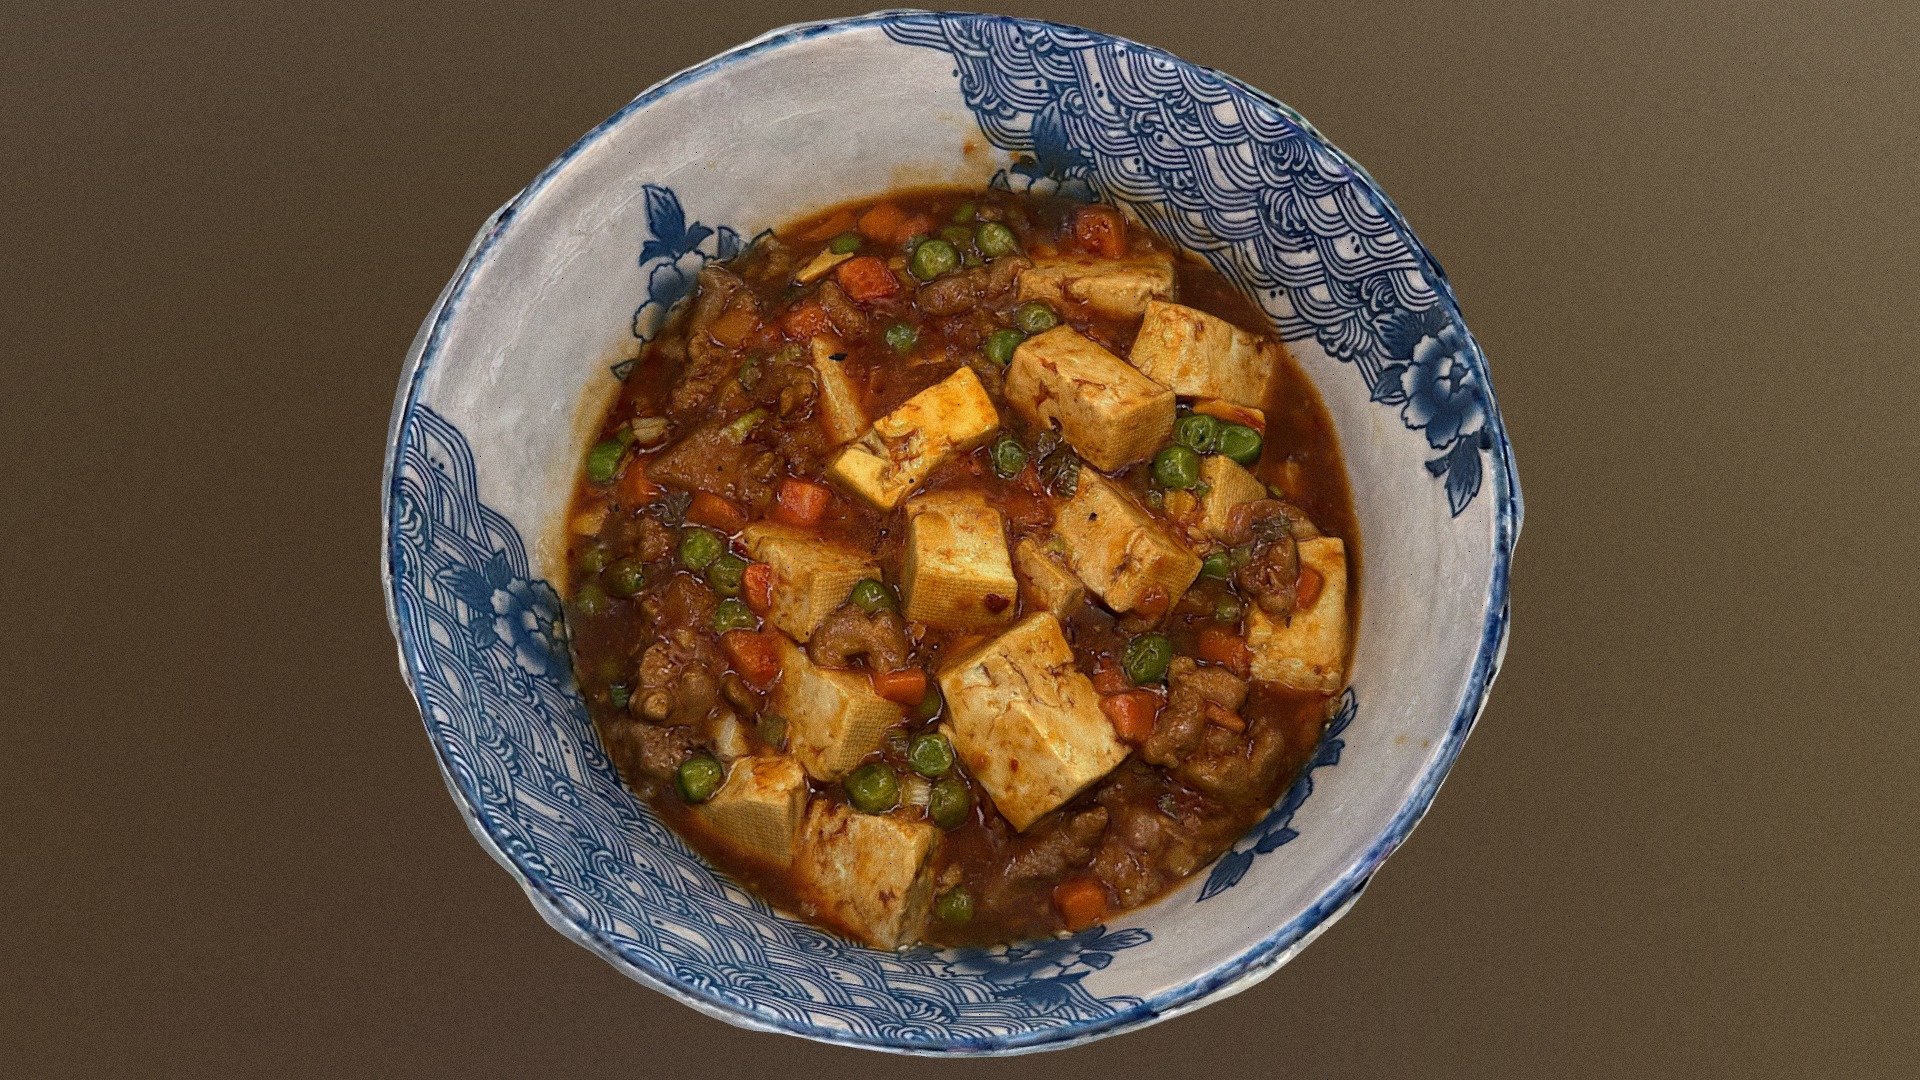 A spicy and flavorful dish made with soft tofu, minced pork, and Sichuan peppercorns, simmered together in a spicy and aromatic sauce.

Emma’s Boldly Redefined Asian Cuisine Driven by modern culinary technique and Northern California influence

817 Francisco Blvd W, San Rafael, CA 94901 - Emma's Ma Po Tofu Pot - 3D model by Augmented Reality Marketing Solutions LLC (@AugRealMarketing) 3d model